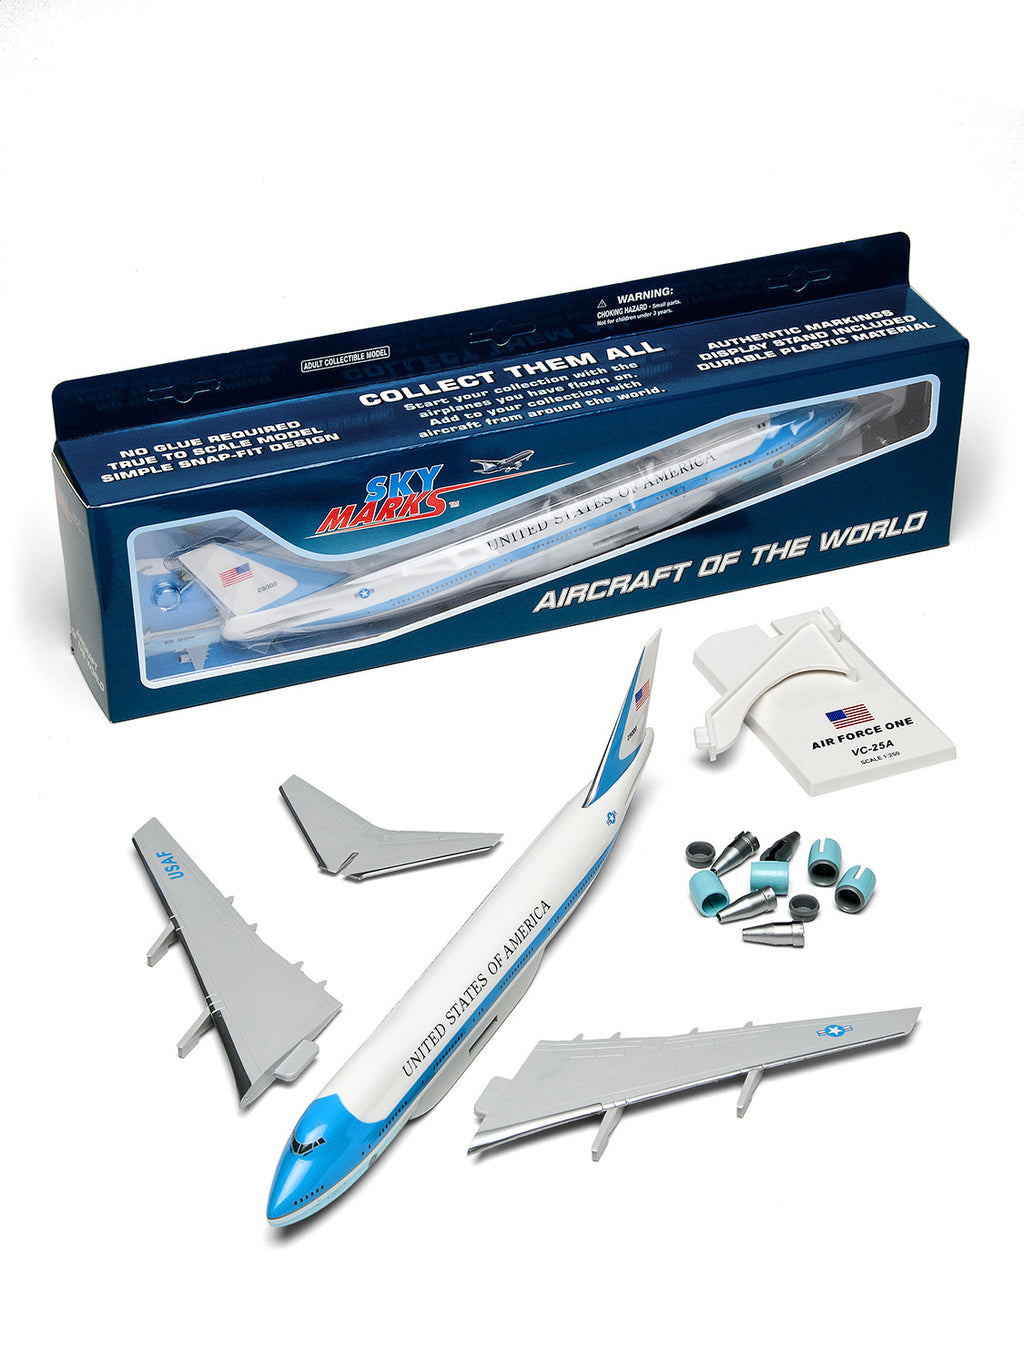 air force one model airplane